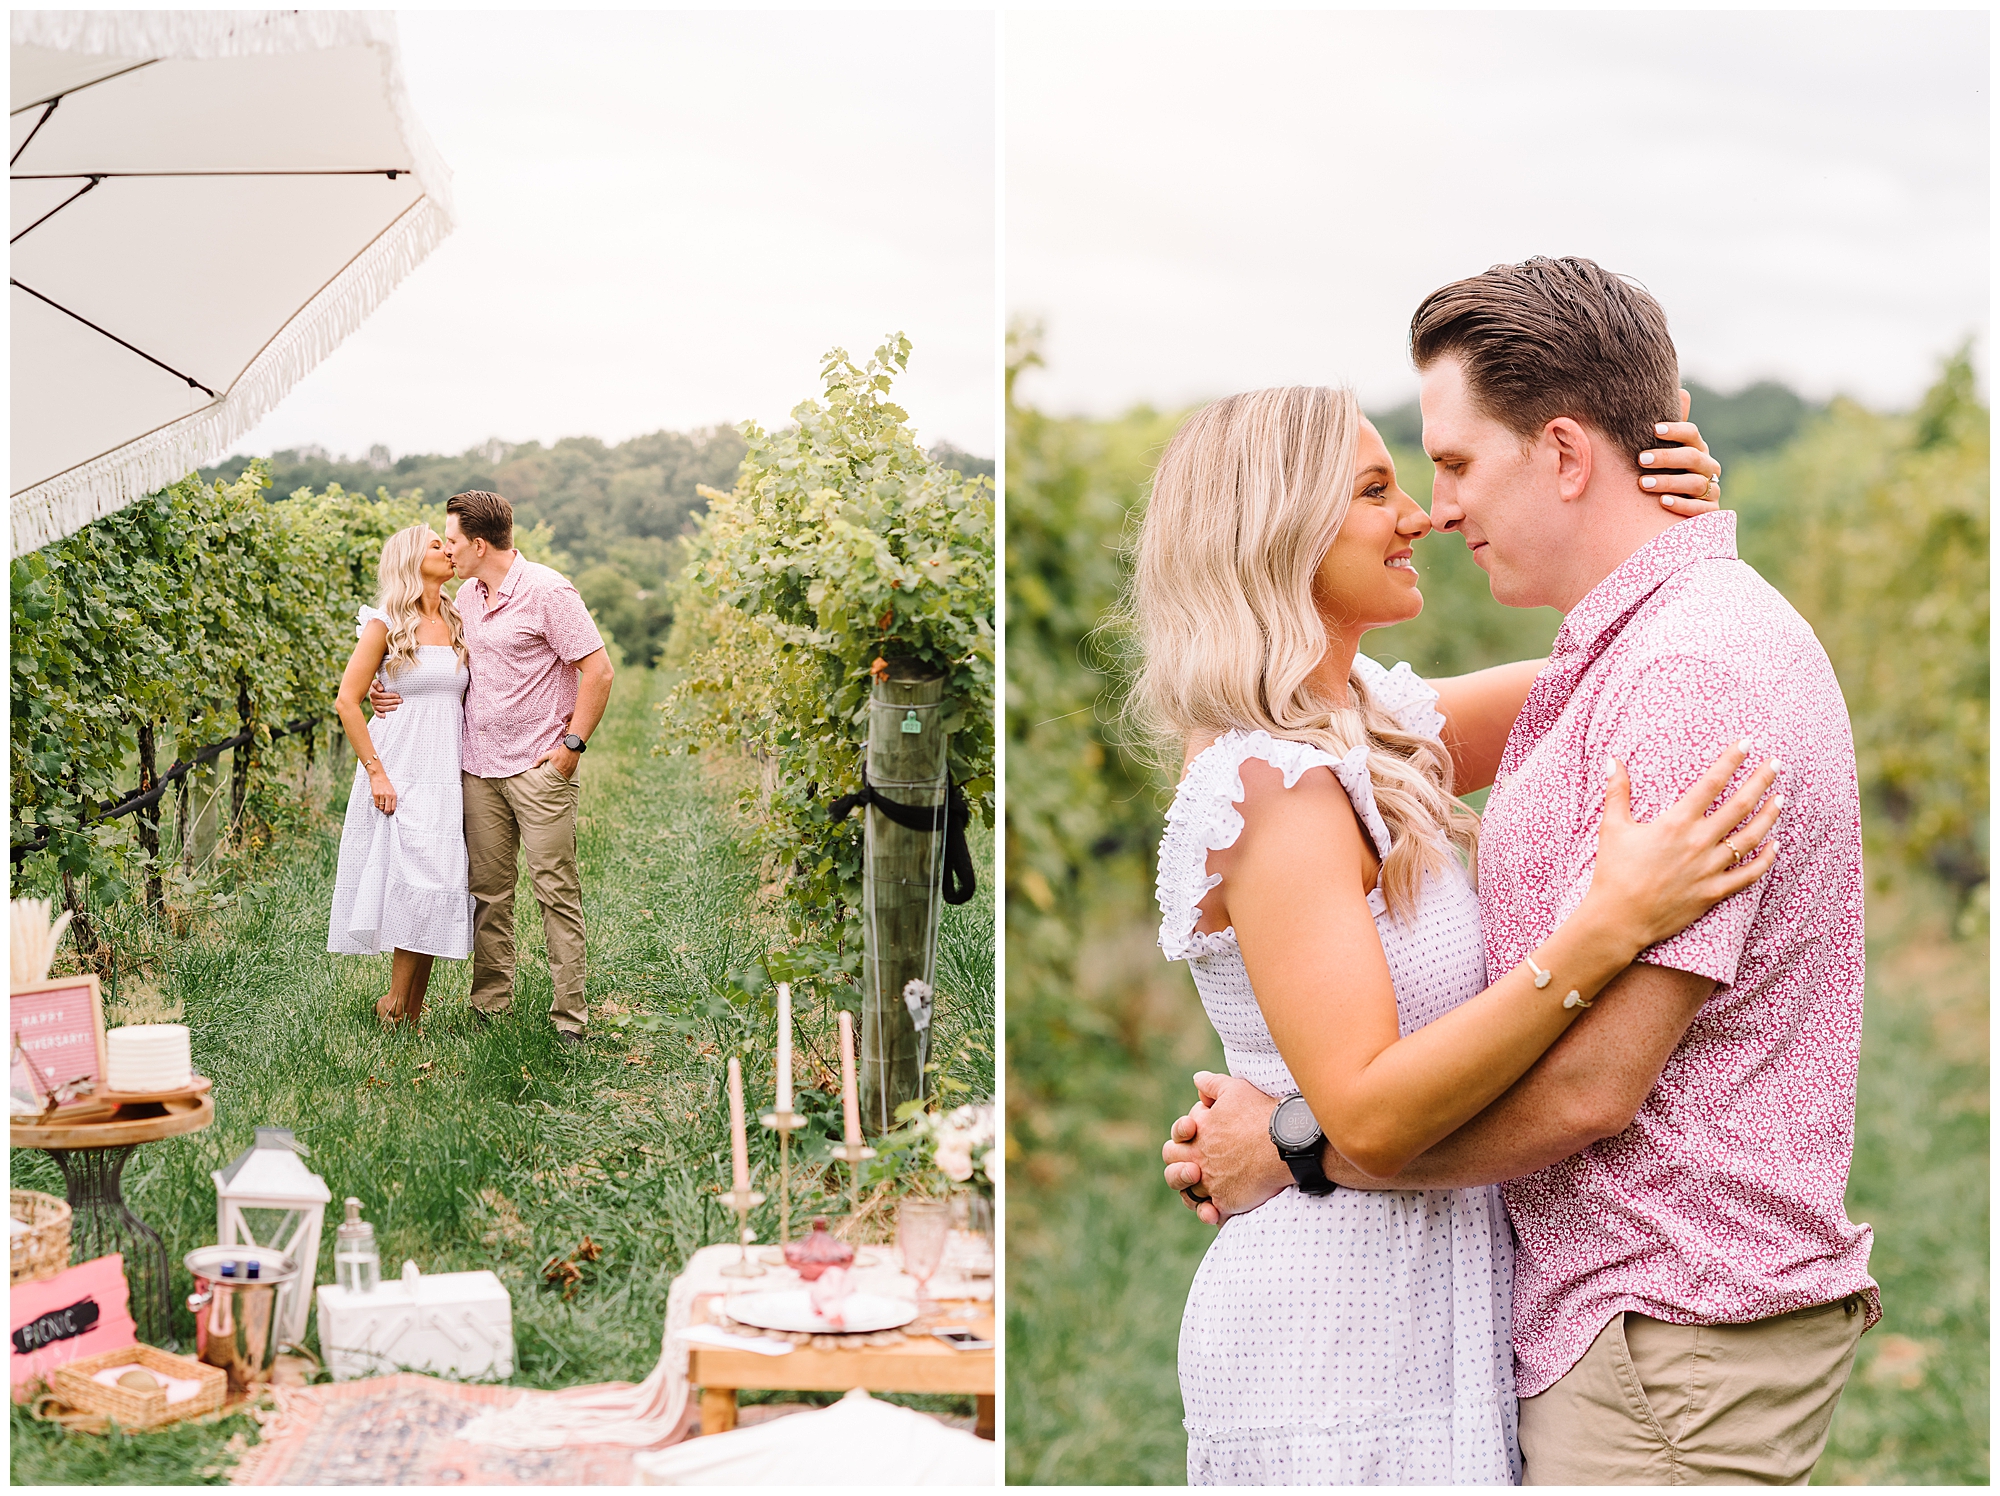 KrystaNormanPhoto_Walsh_Familly_Wine_Fall_Anniversary_Picnic_Purcellville_Virginia_0001.jpg